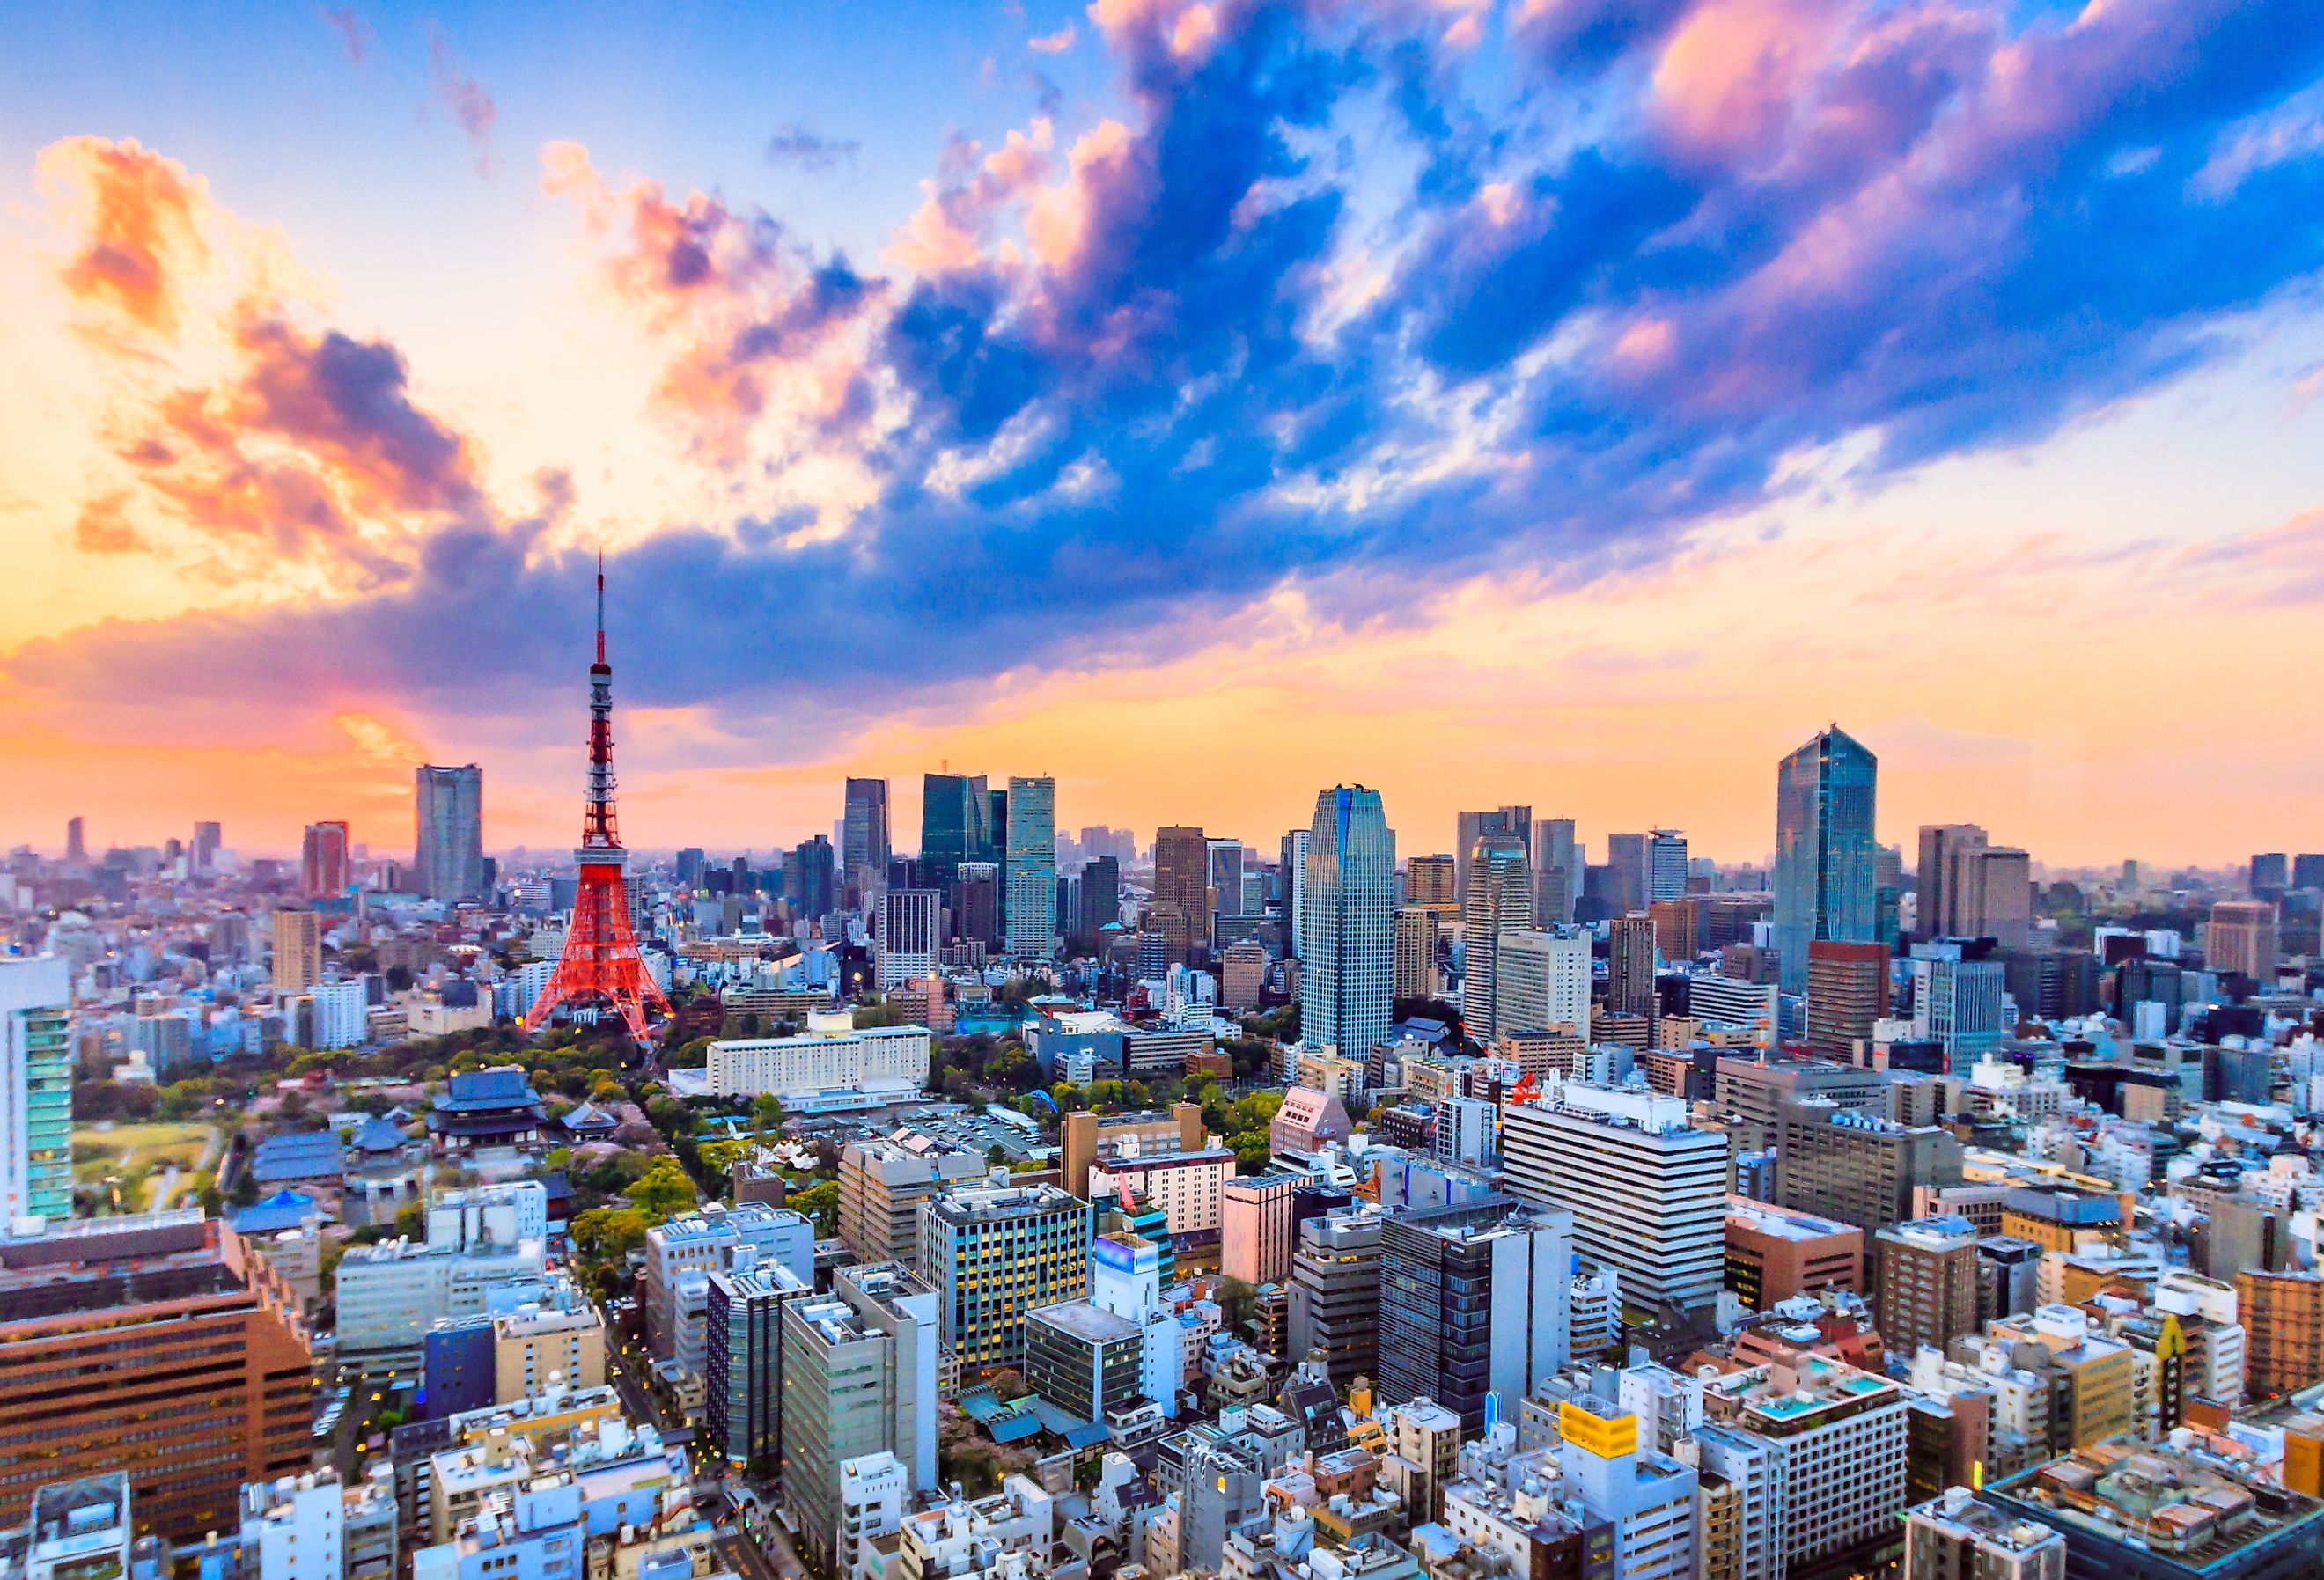 Cityscapes view sunset of Tokyo city Japan. Image credit apiguide via Shutterstock